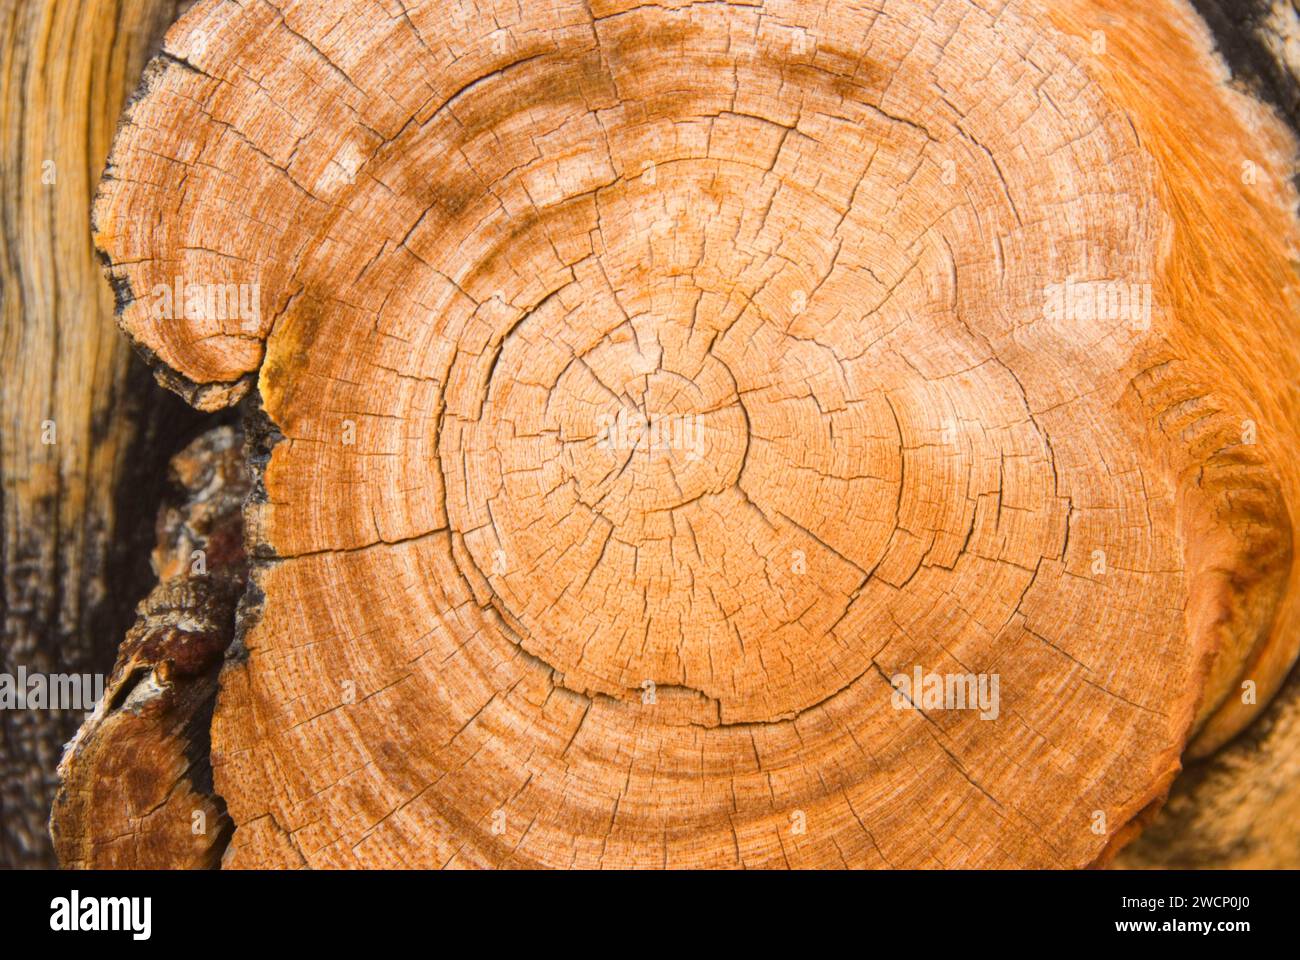 Bristlecone pine cut showing tree rings, Ancient Bristlecone Pine Forest, Ancient Bristlecone National Scenic Byway, Inyo National Forest, California Stock Photo